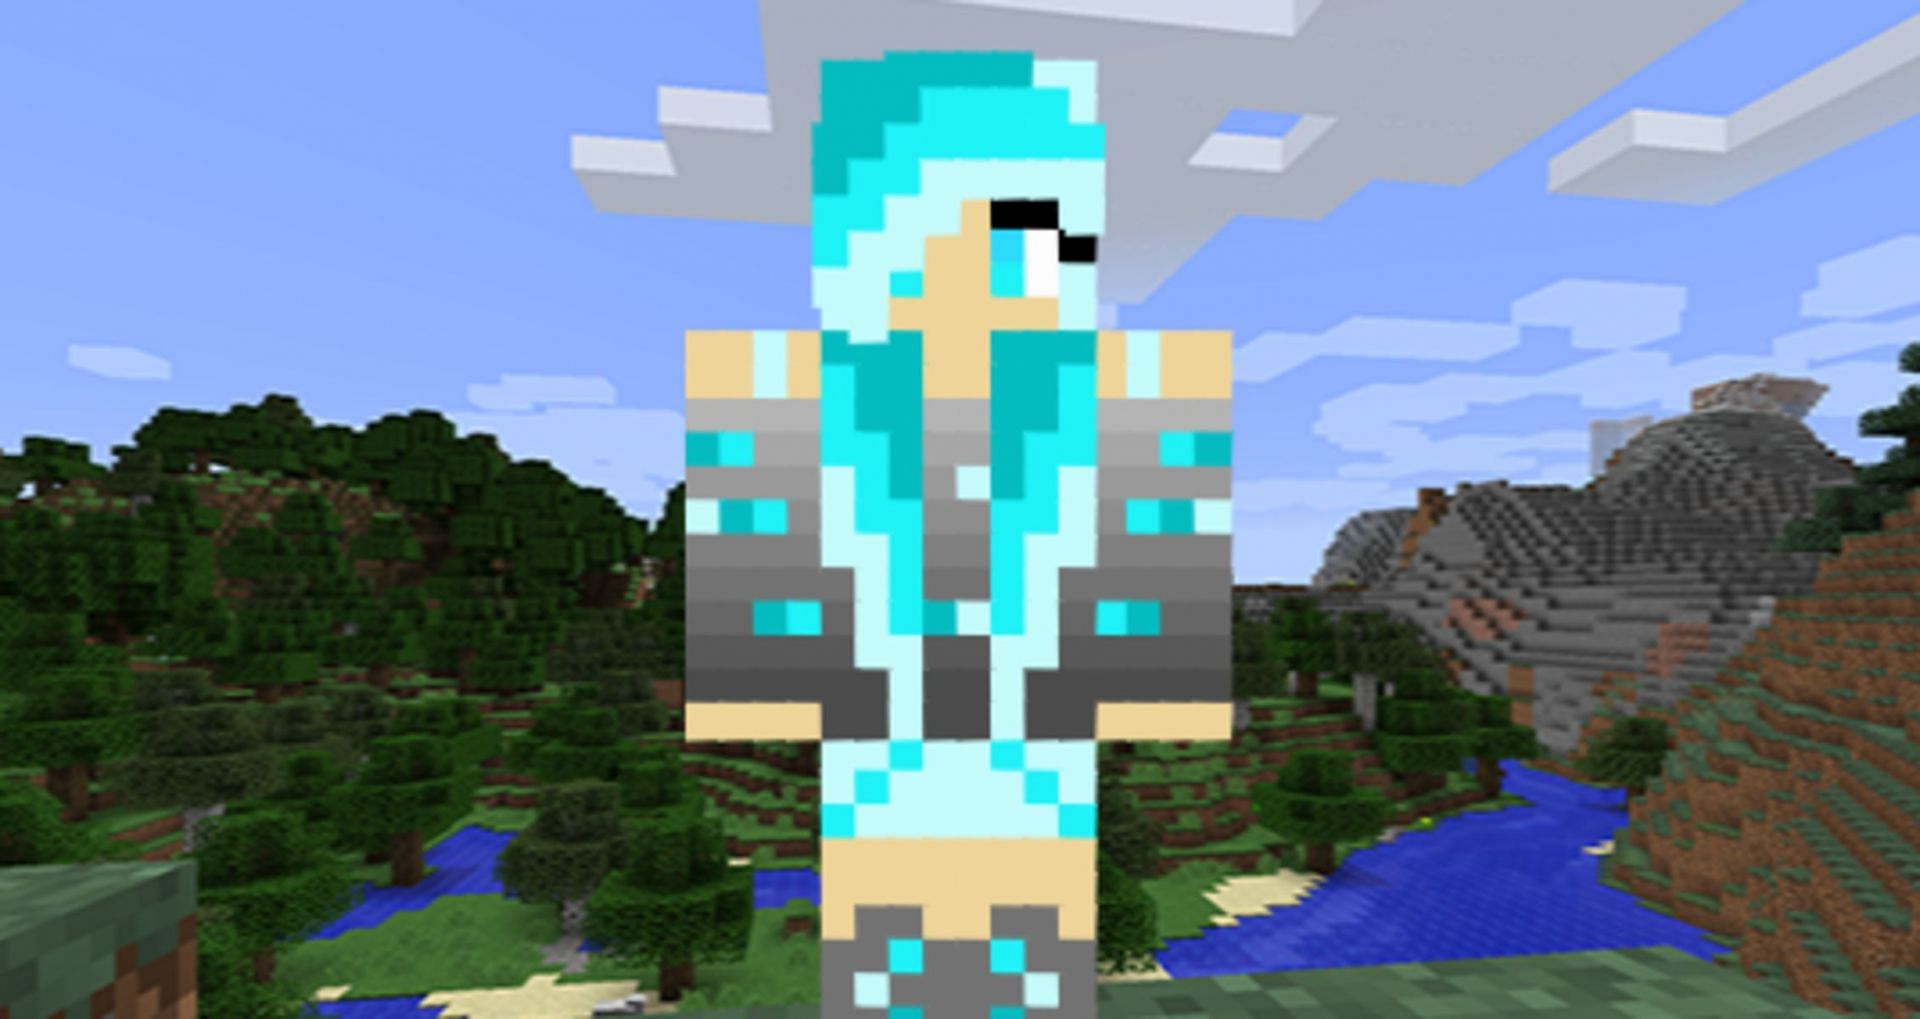 Harness the beauty of diamonds with this Minecraft skin (Image via xXCookieMonsterX/The Skindex)